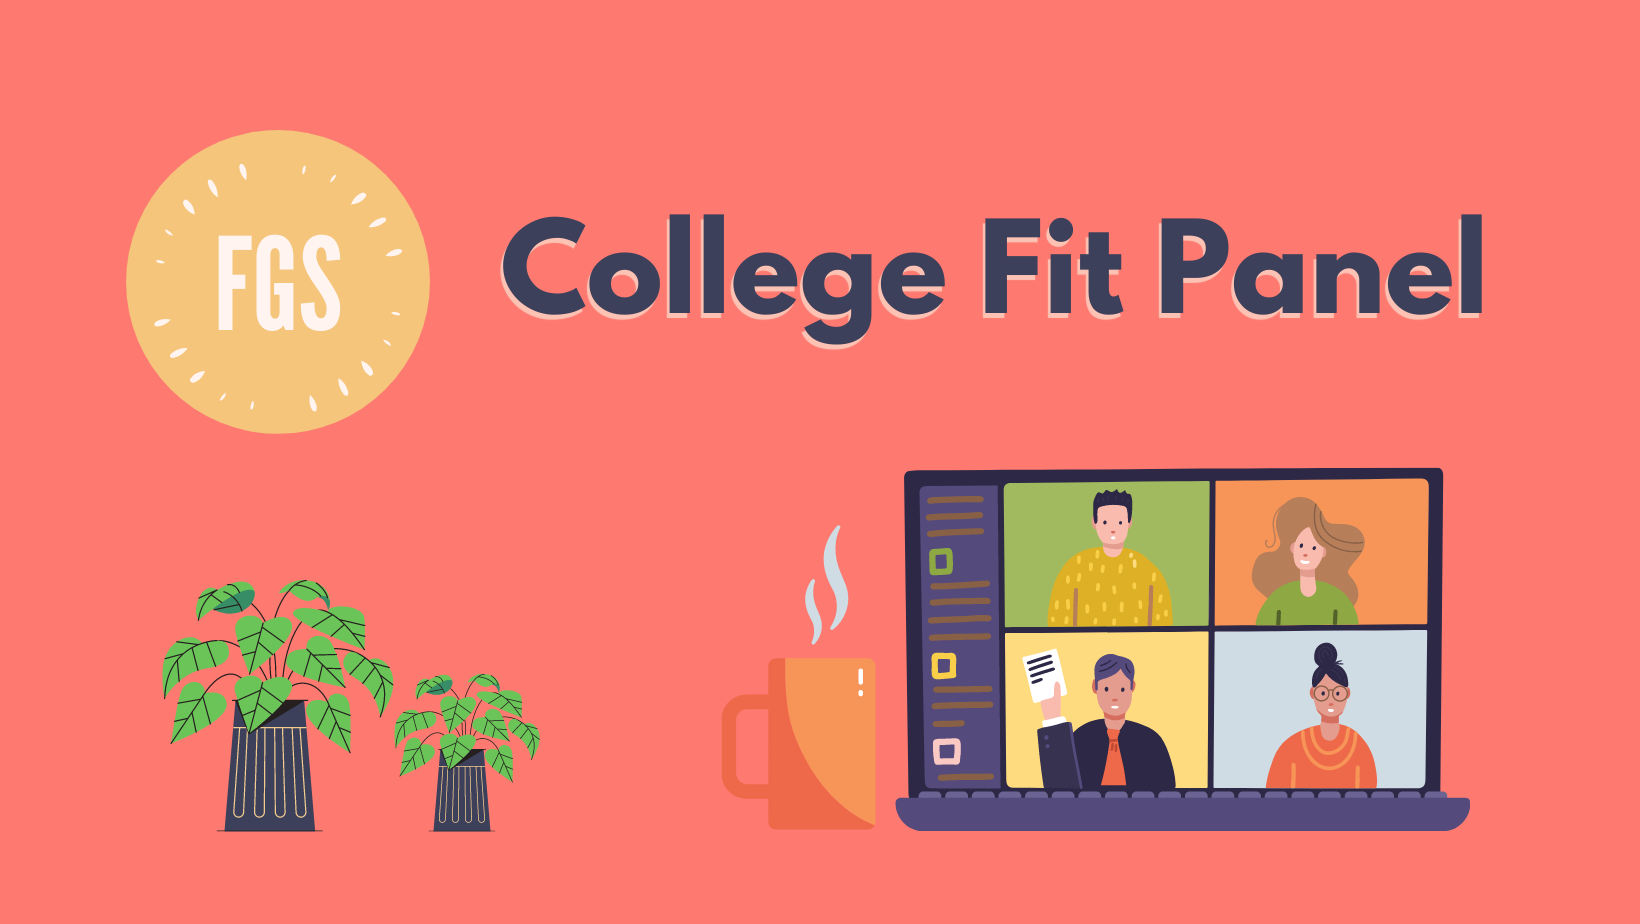 College fit panel